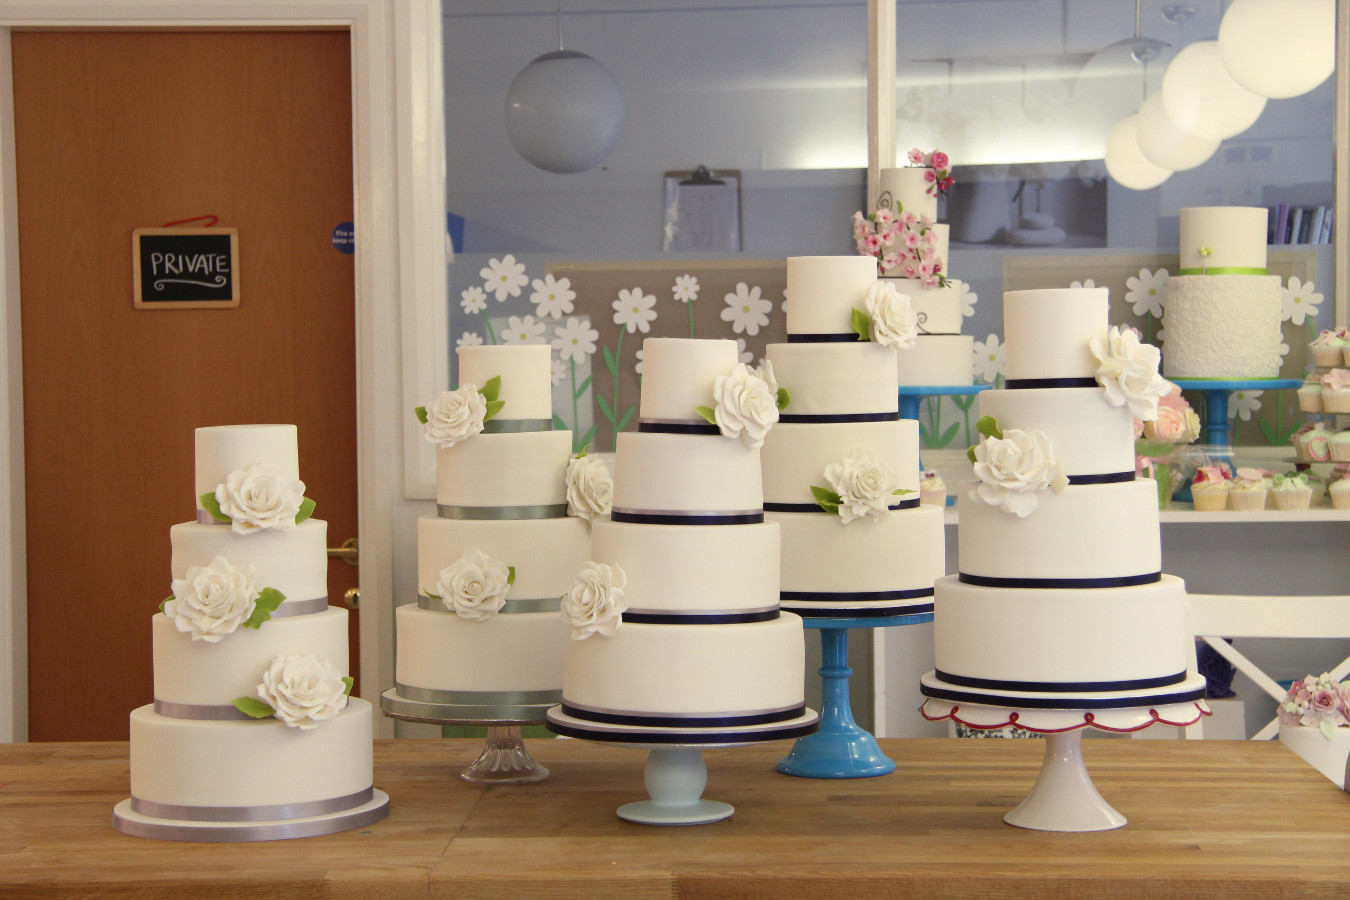 4 tiered cakes display